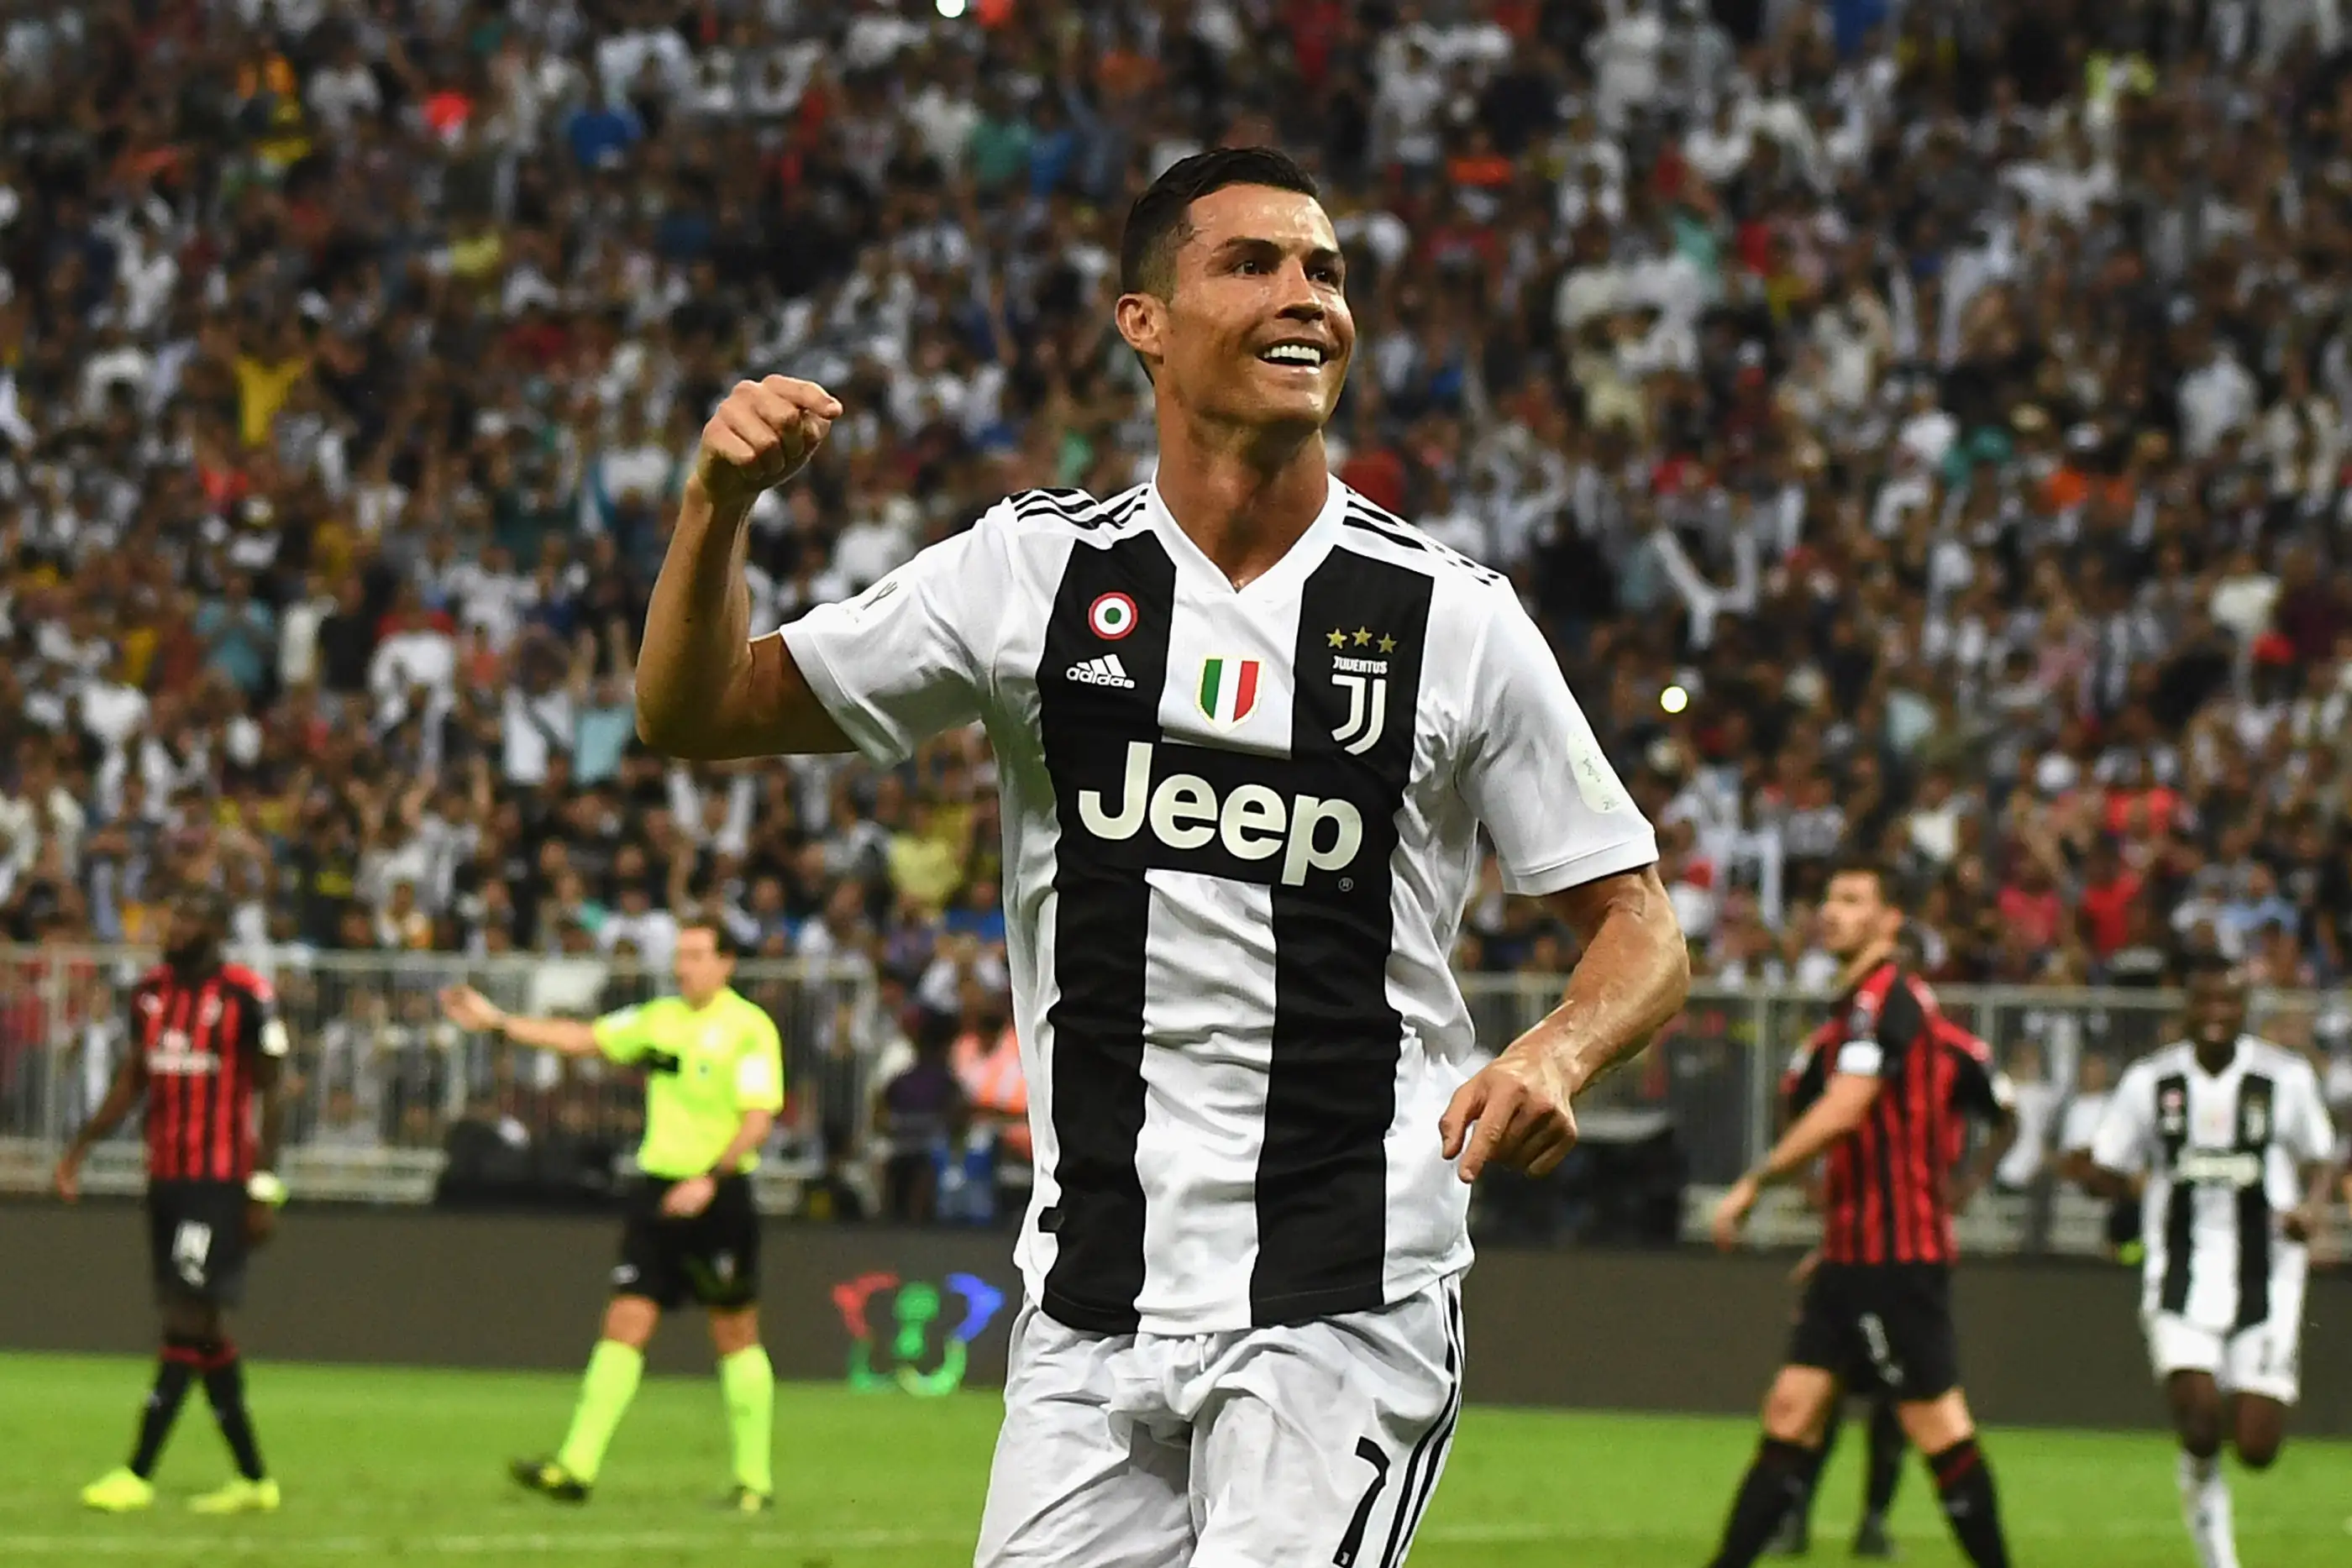 Cristiano Ronaldo of Juventus celebrates after scoring his sides first goal during the Italian Supercup match between Juventus and AC Milan at King Abdullah Sports City on January 16, 2019 in Jeddah, Saudi Arabia.